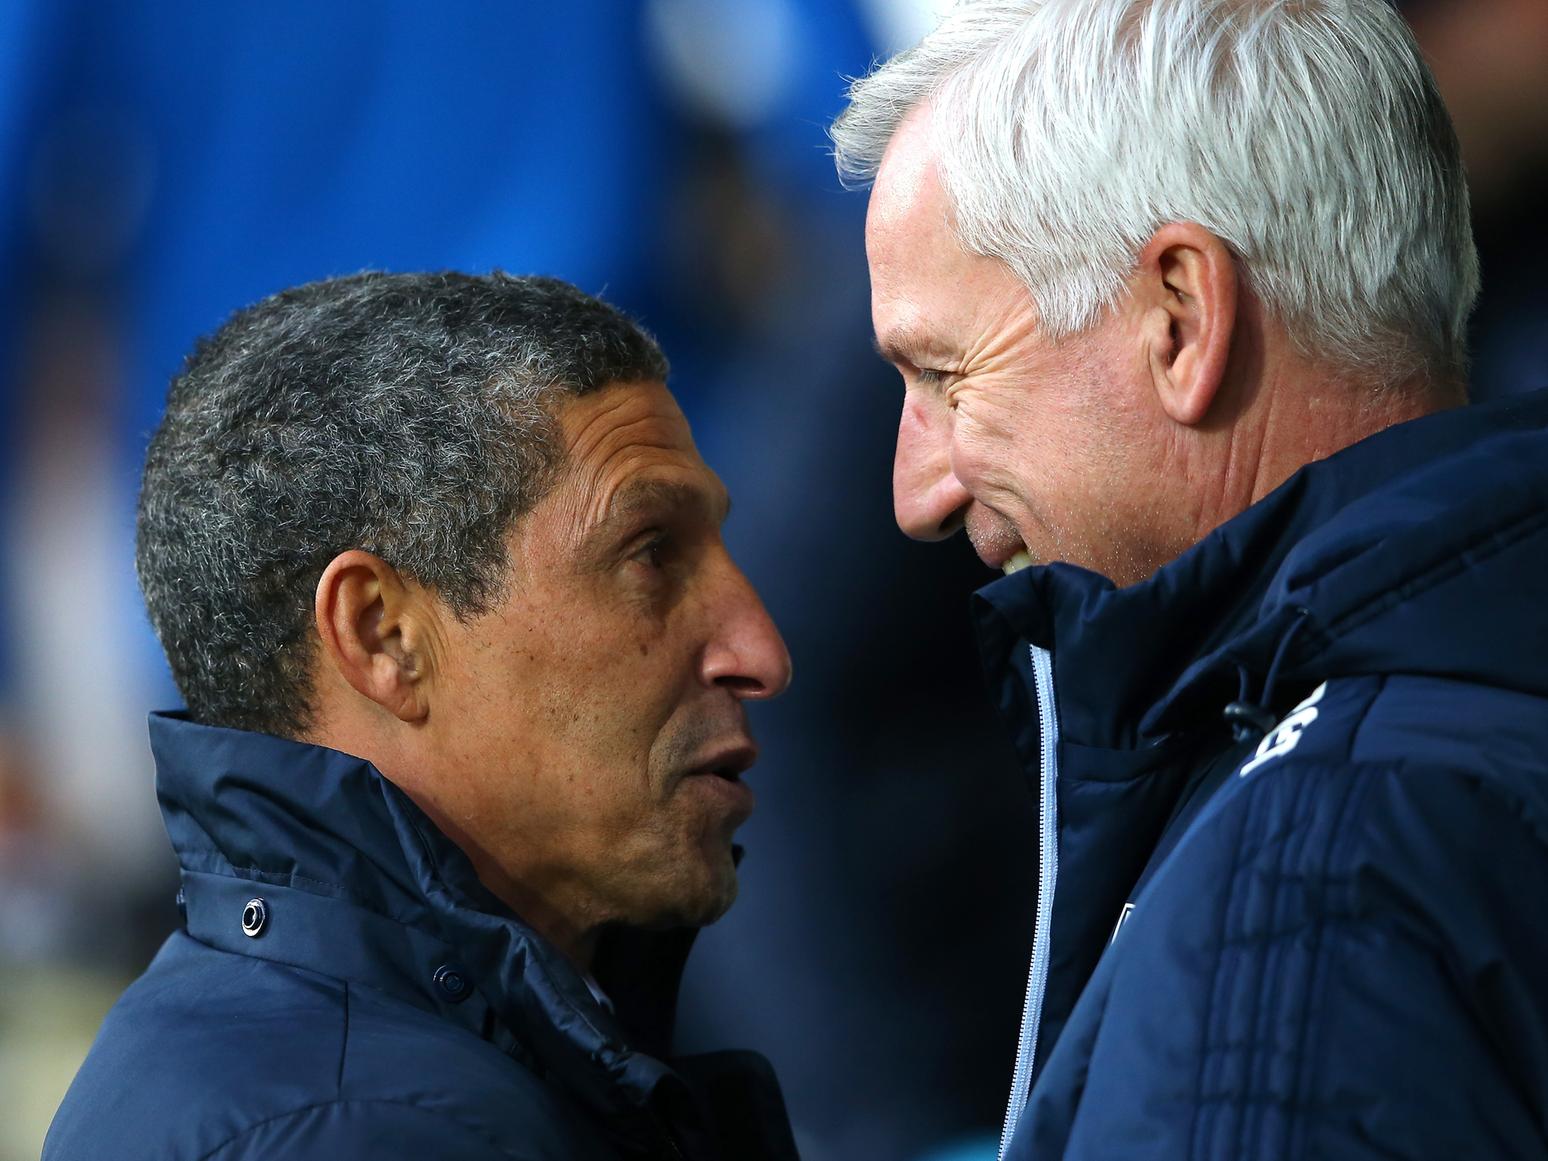 Chris Hughton and Alan Pardew are the two strong favourites to become the next Stoke City manager, as speculation over Nathan Jones leaving the struggling club continues to intensify. (Paddy Power)